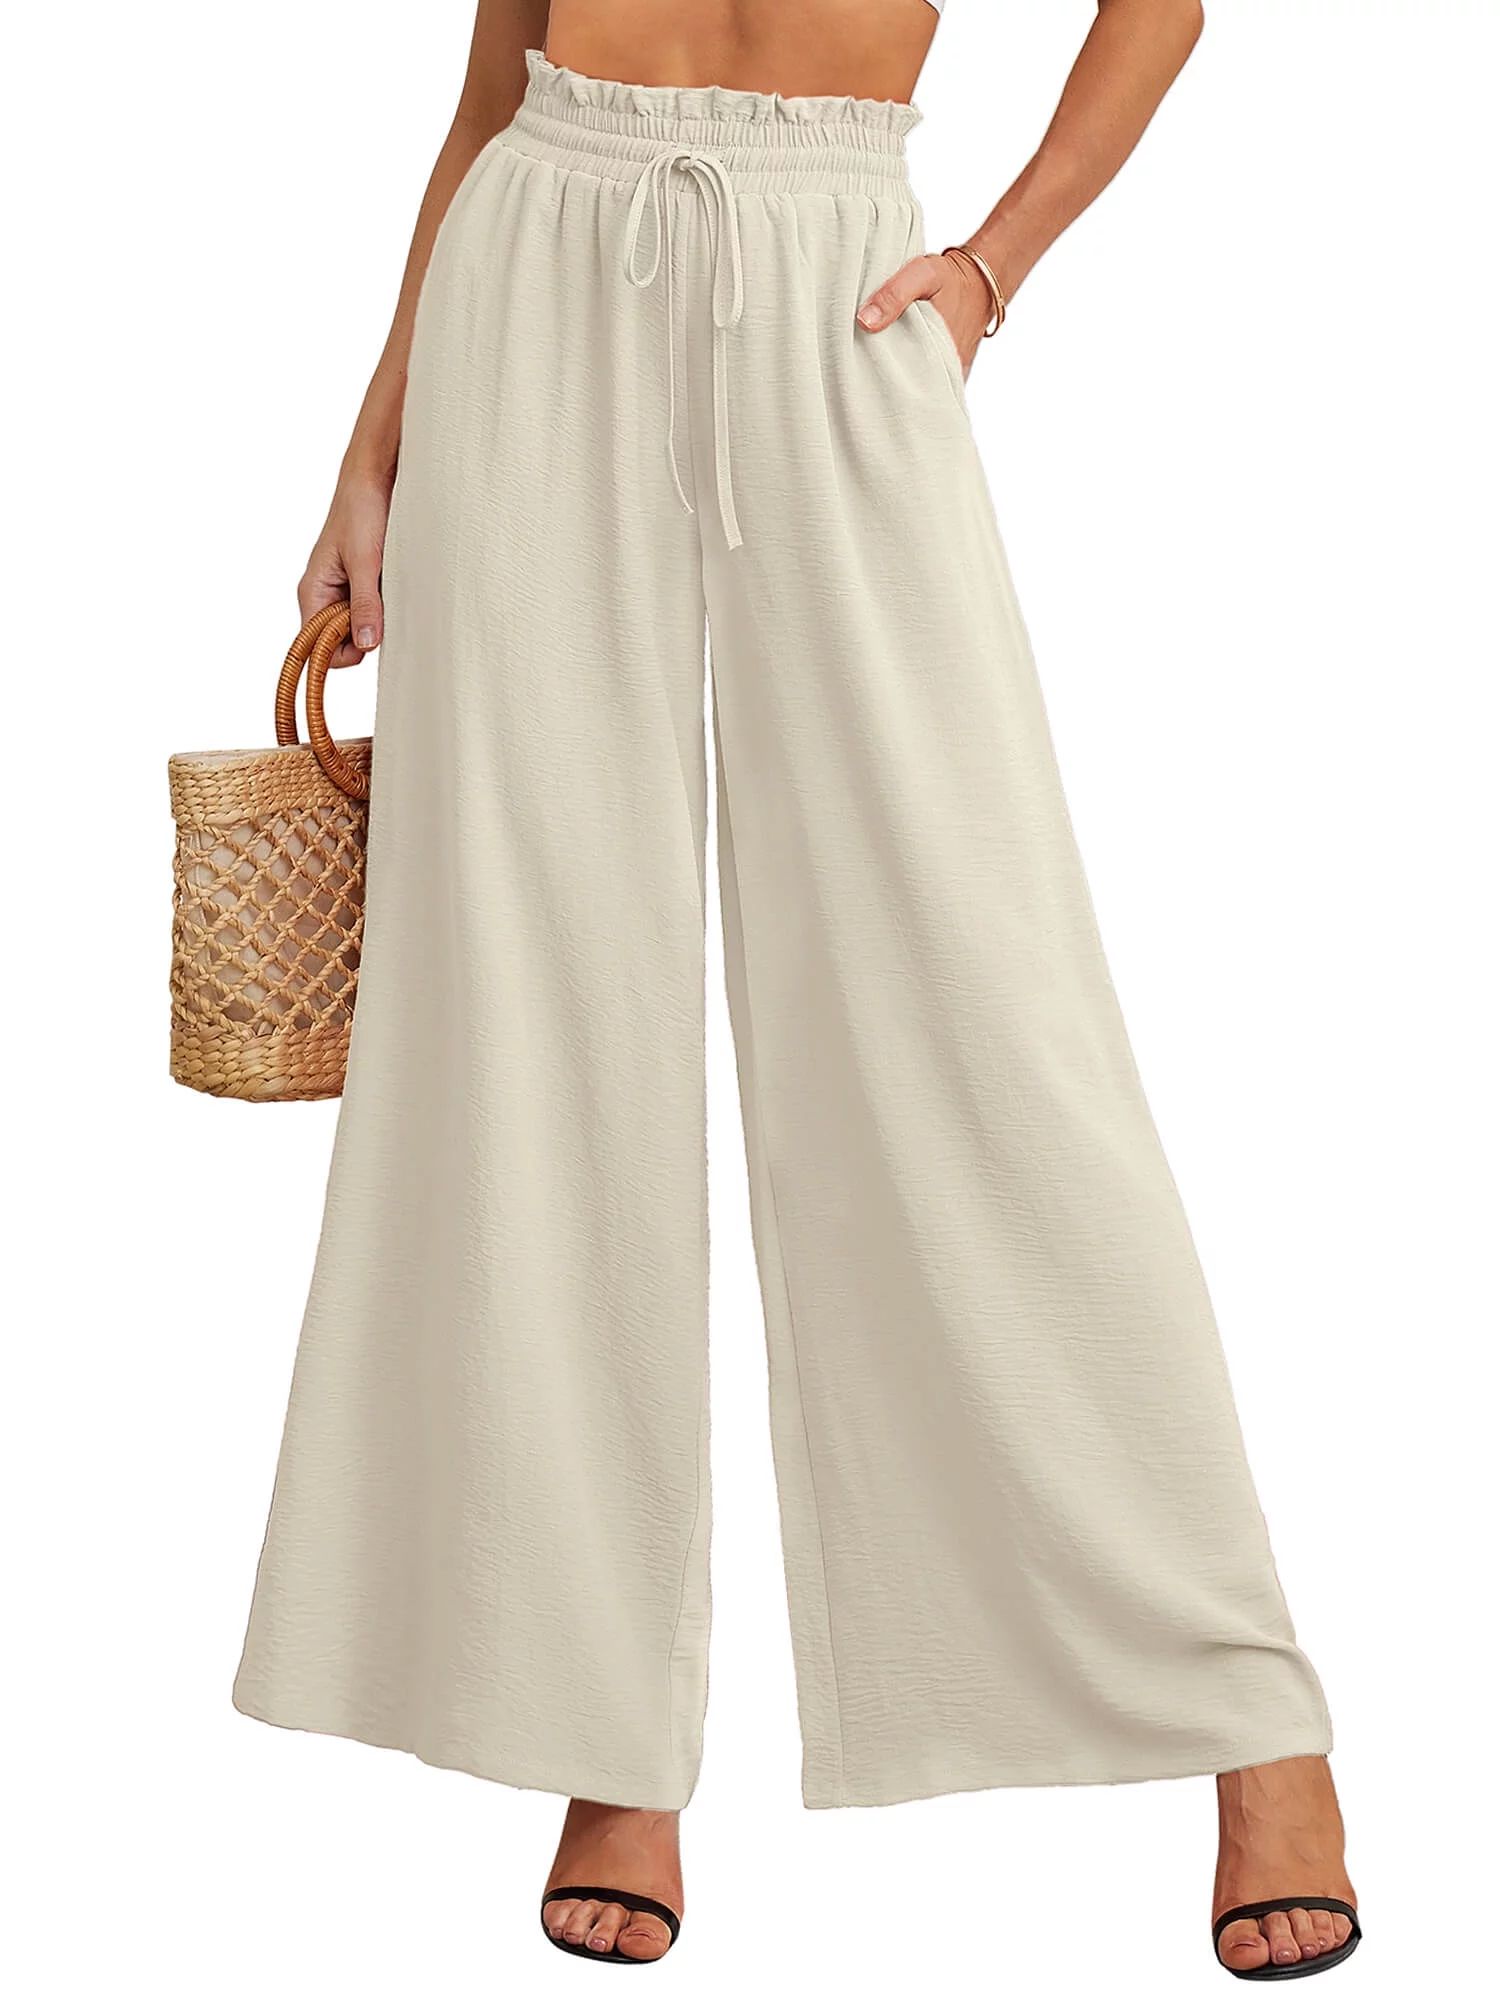 SHOWMALL Women's Pants Casual Elastic High Waisted Wide Leg Pants Ivory L Palazzo Pants with Pock... | Walmart (US)